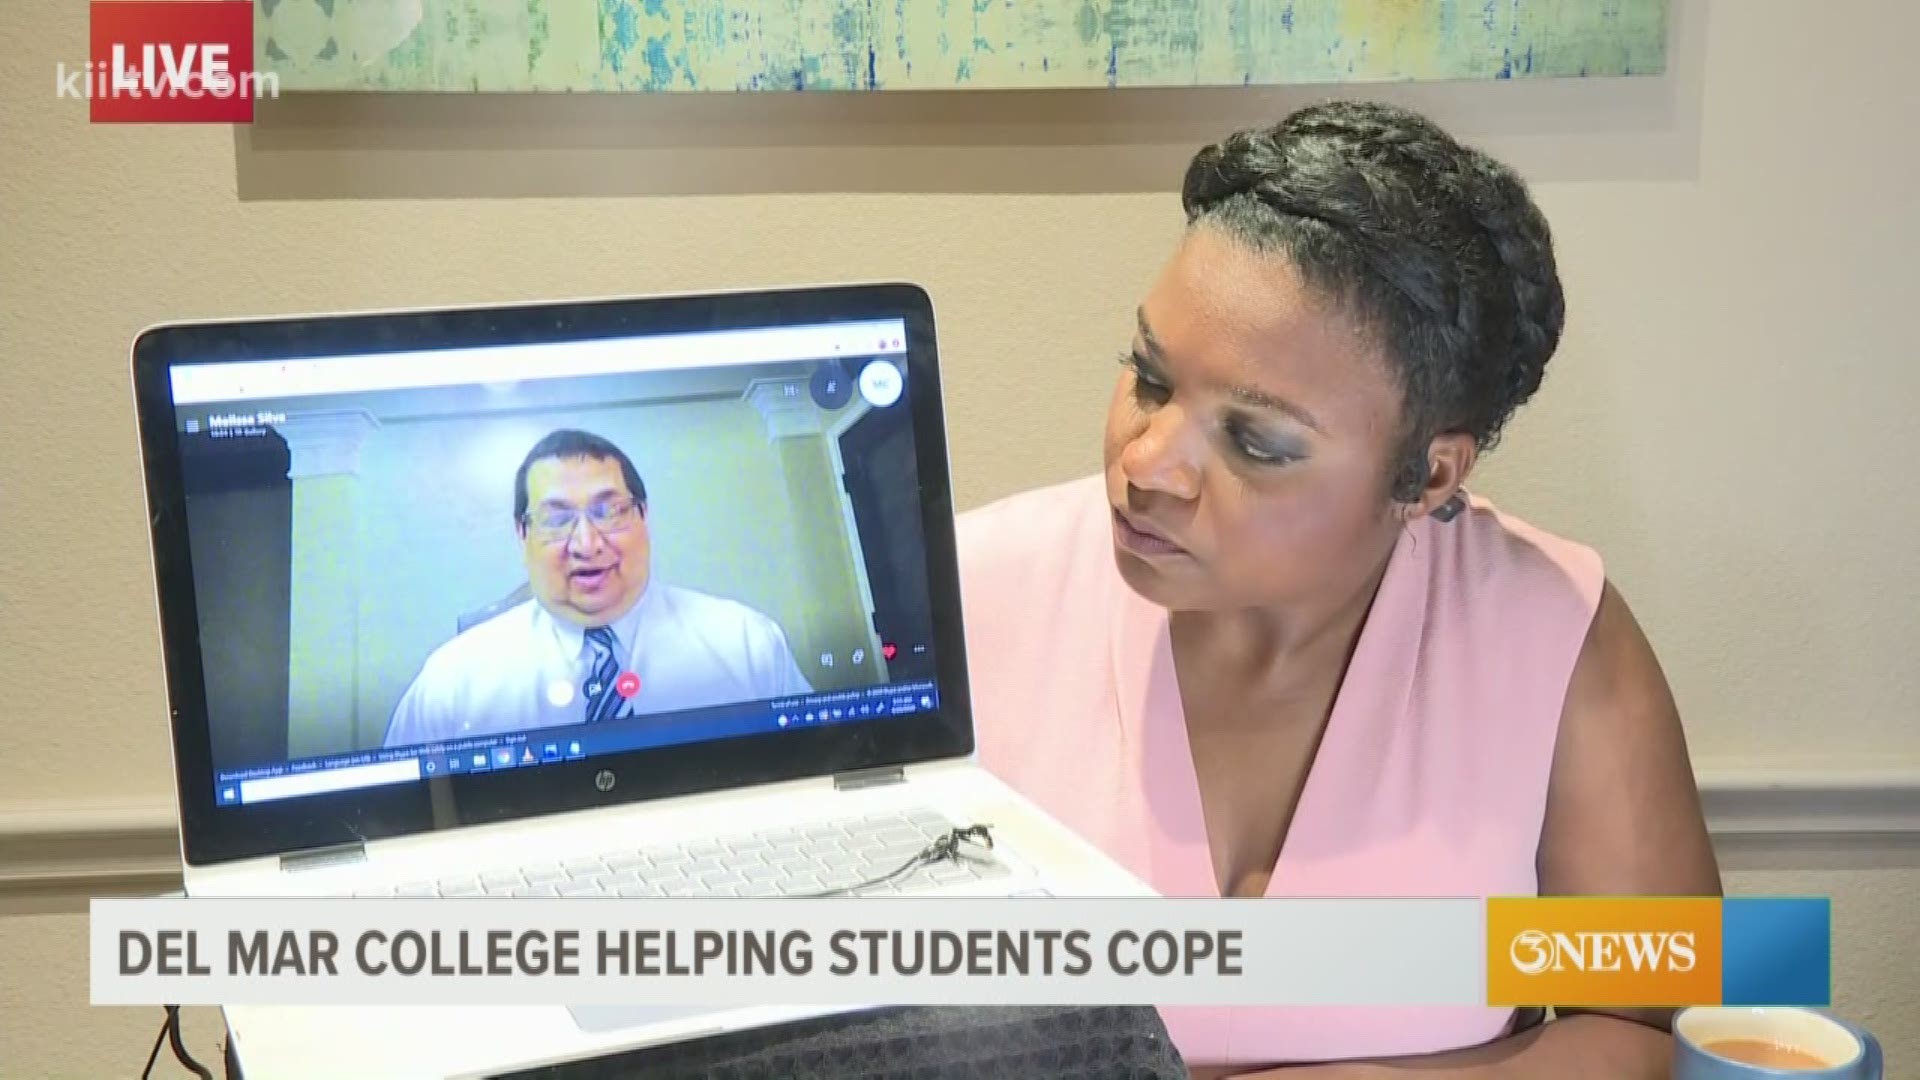 Our 3 News reporter, Marissa Cummings interviews Rito Silva, Del Mar College VP of Student Affairs about how the school is adapting to help students.